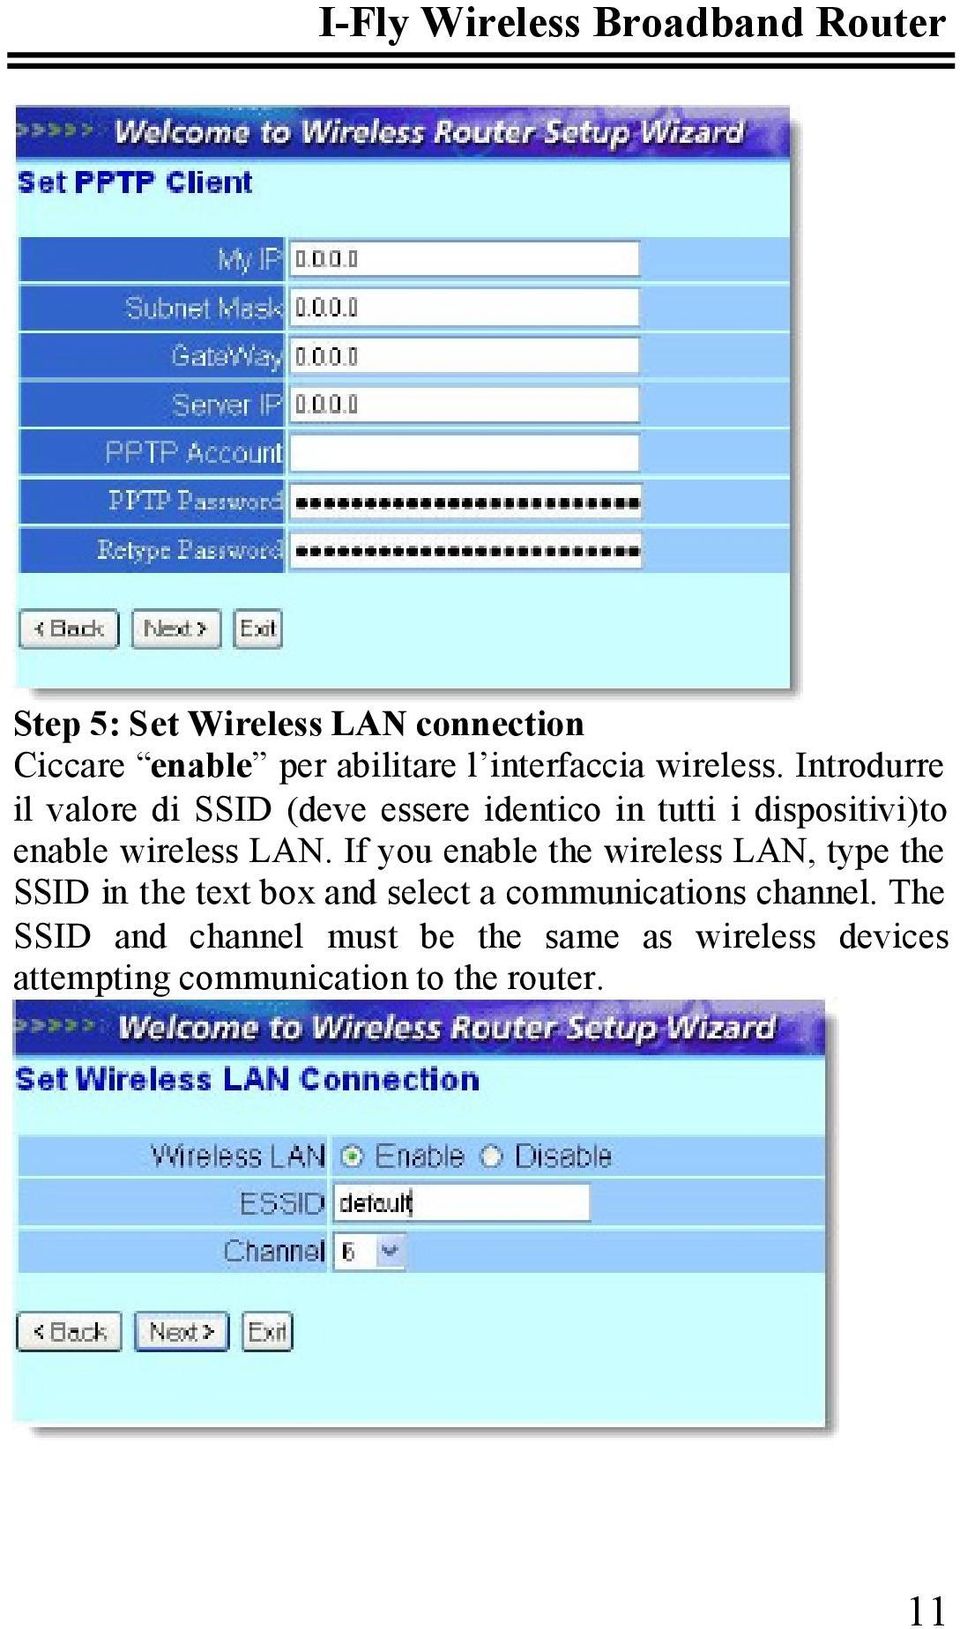 If you enable the wireless LAN, type the SSID in the text box and select a communications